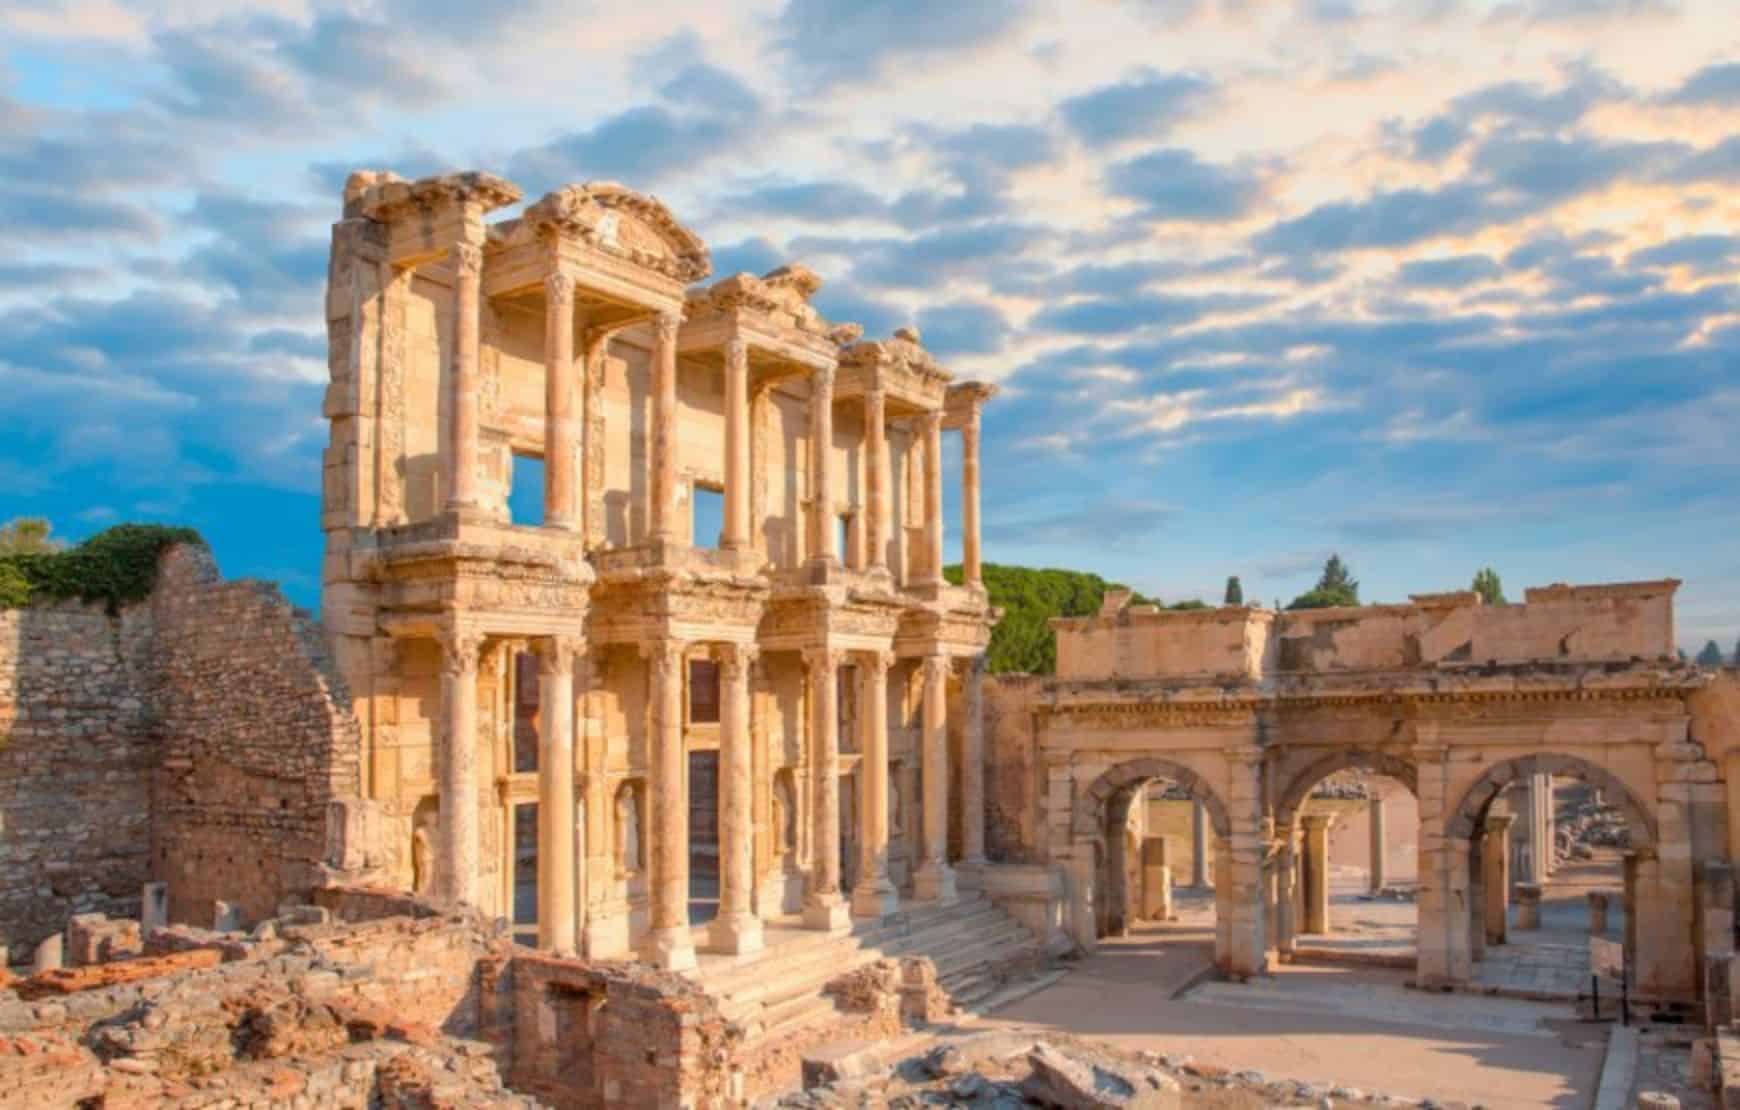 Get a chance to visit Celsus Library in our Turkey's Classical Wonders Private Tour